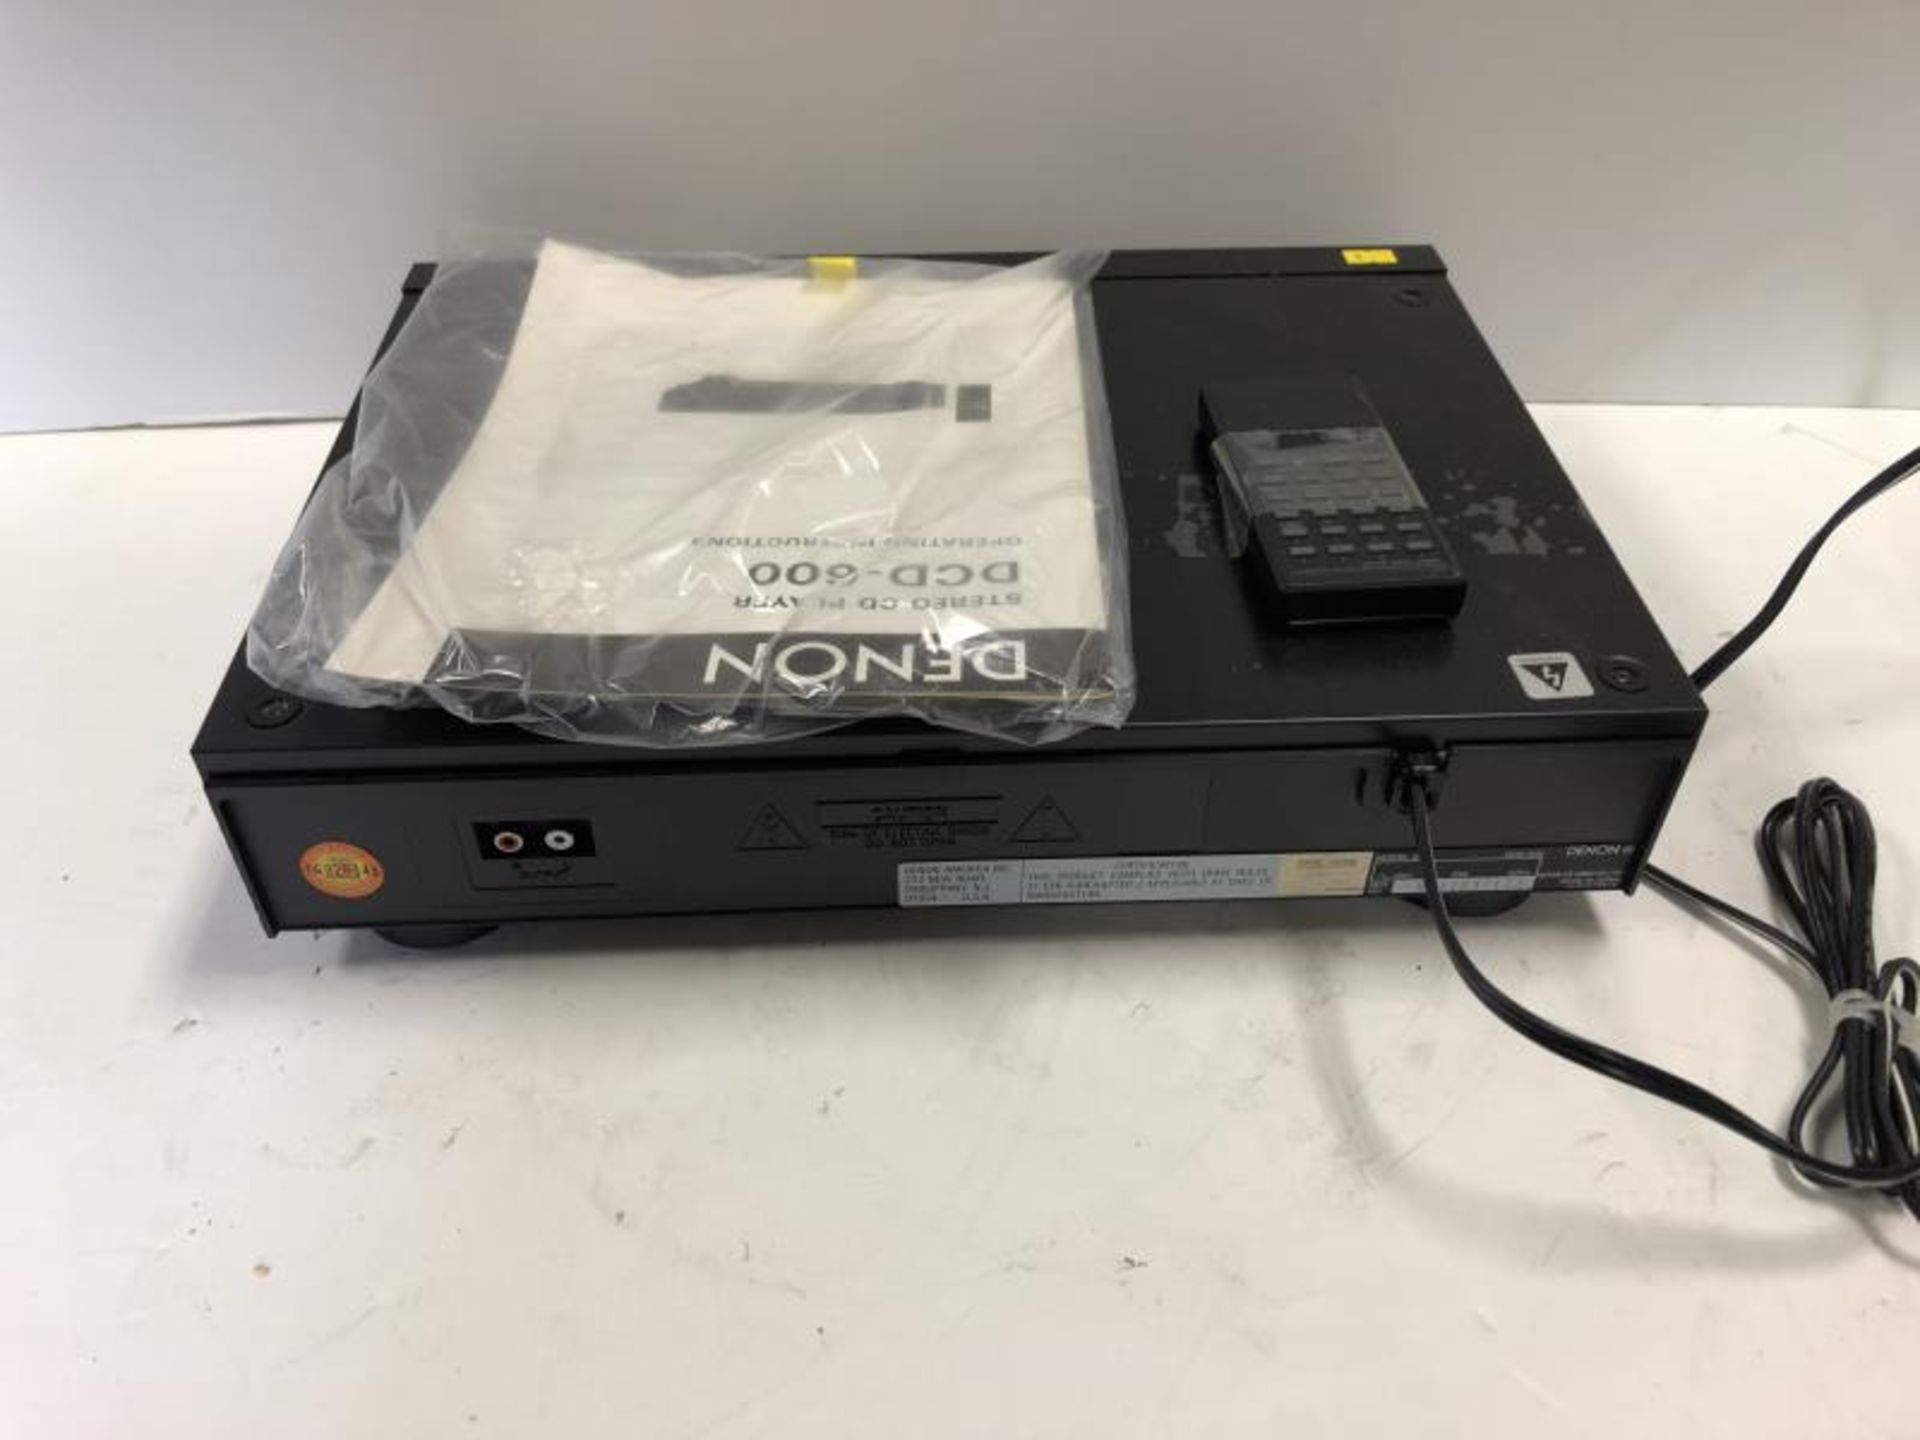 Denon model DCD 600 CD player, with manual and remote, tested - powers up - Image 6 of 7